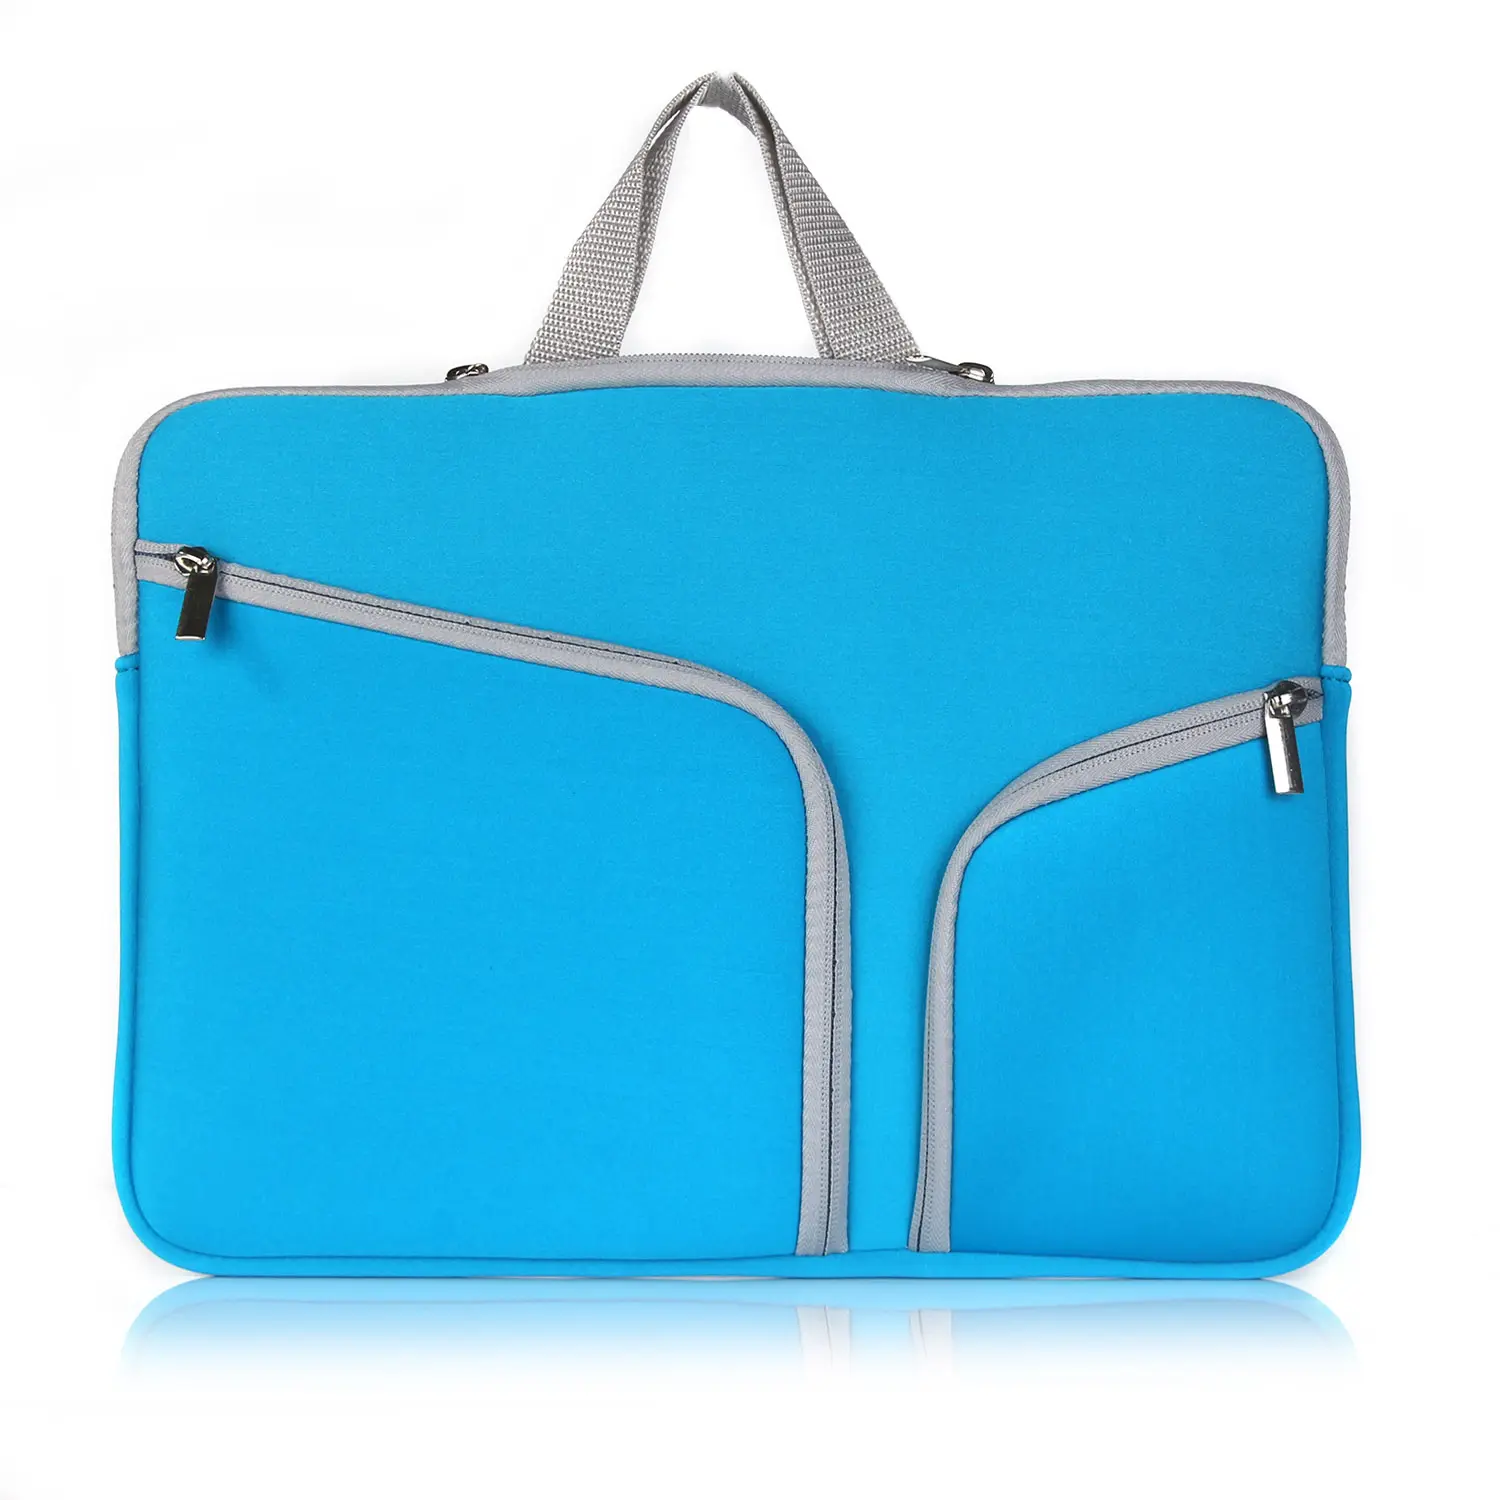 Guangzhou Double Zipper Laptop Sleeve Case Bag Pouch for Macbook Sleeve 15 inch 16.2 inch Notebook Bag